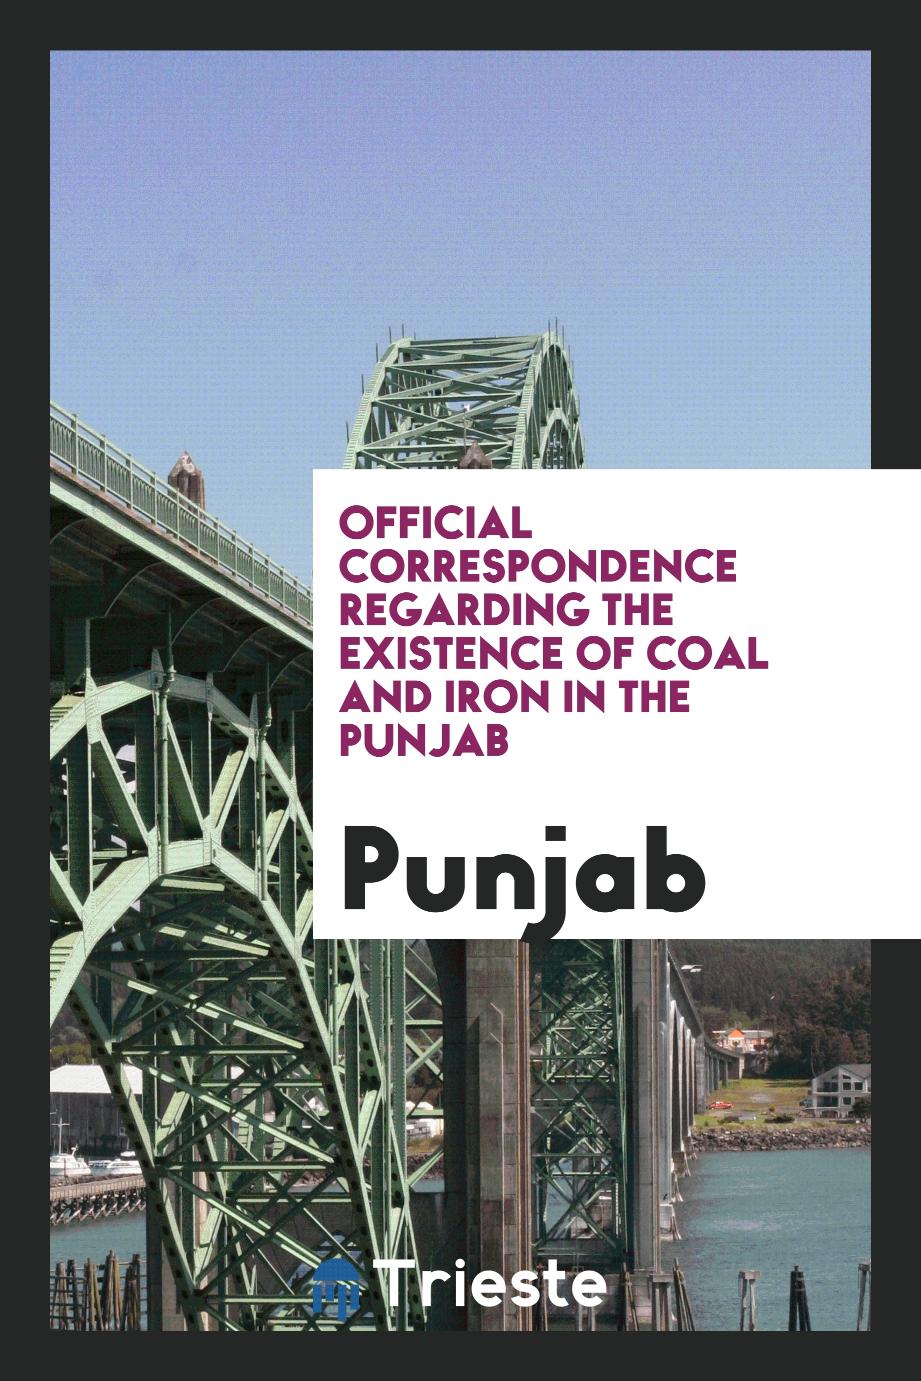 Official correspondence regarding the existence of coal and iron in the Punjab